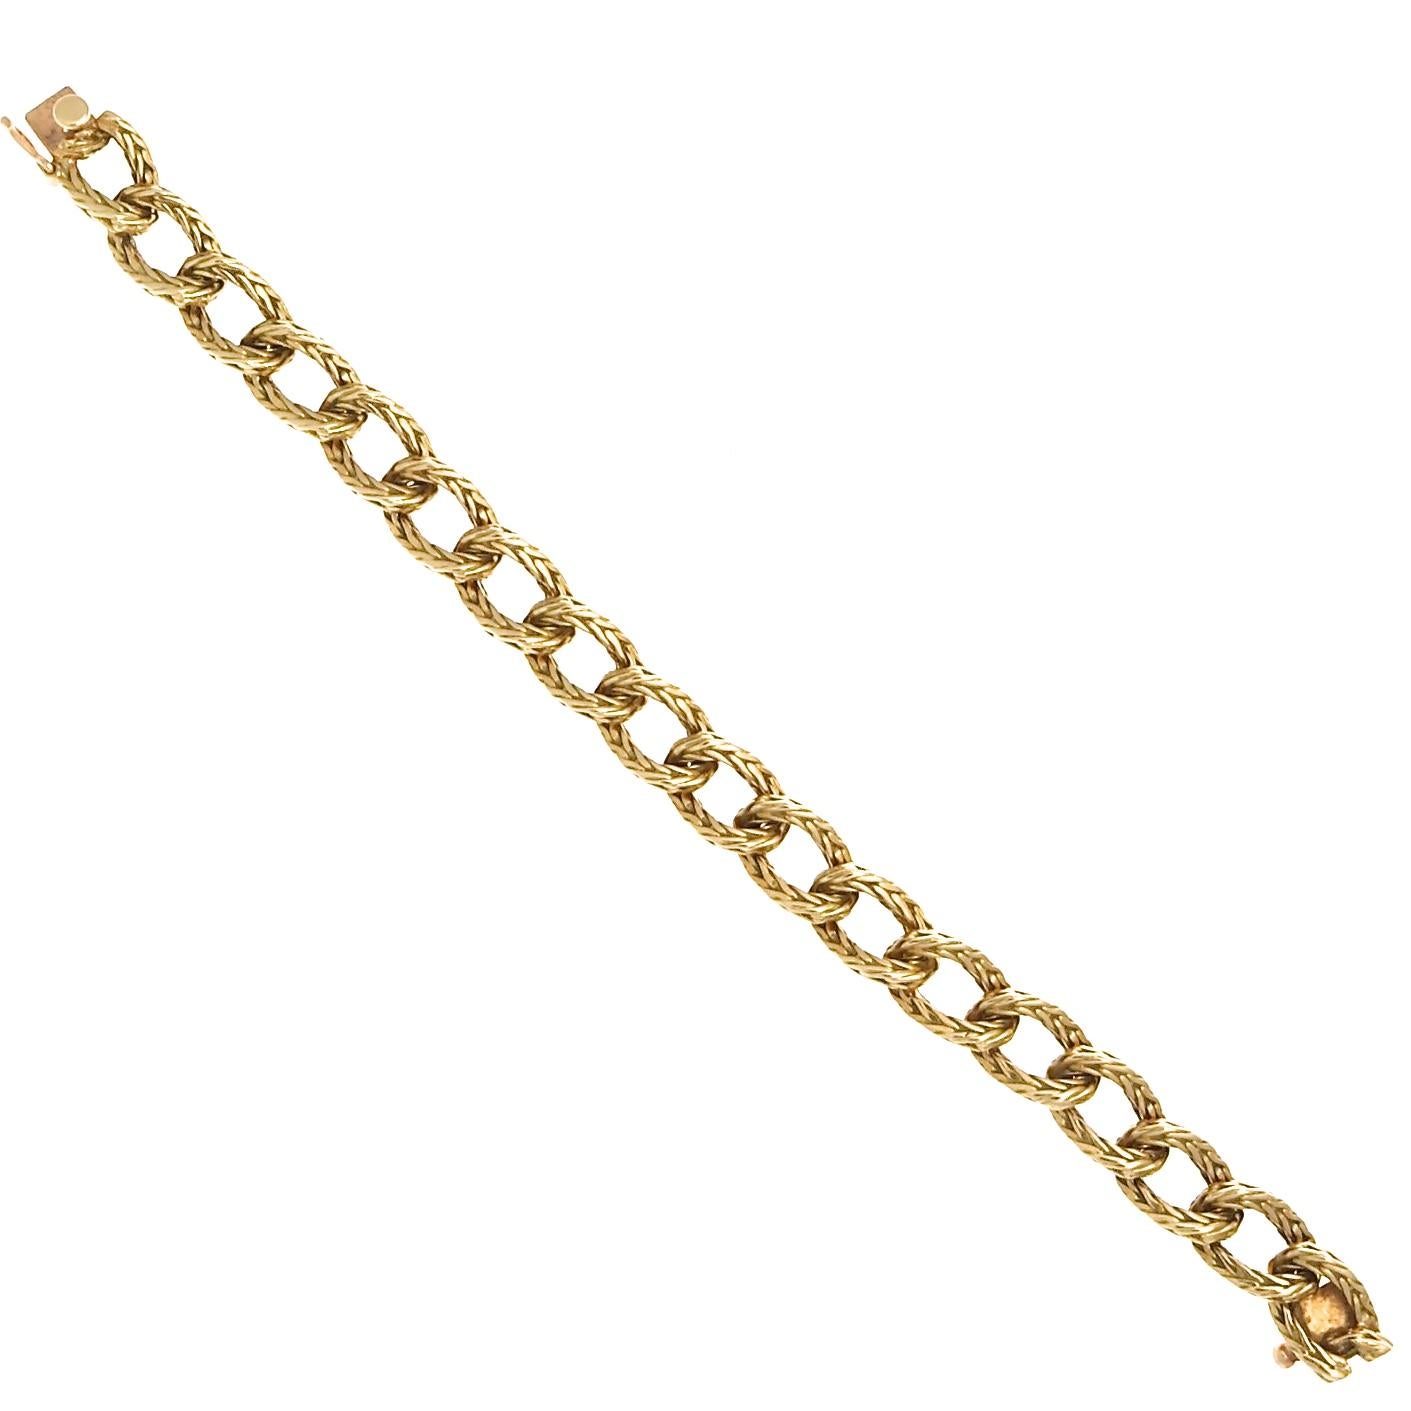 From the jewelry house of Hermes Paris, we found the perfect link bracelet in yellow gold. With woven links that give it a beautiful hand crafted texture, le bracelet will add a vintage vibe to your wrist stack.  Circa 1960s. 7-1/4 inches long x